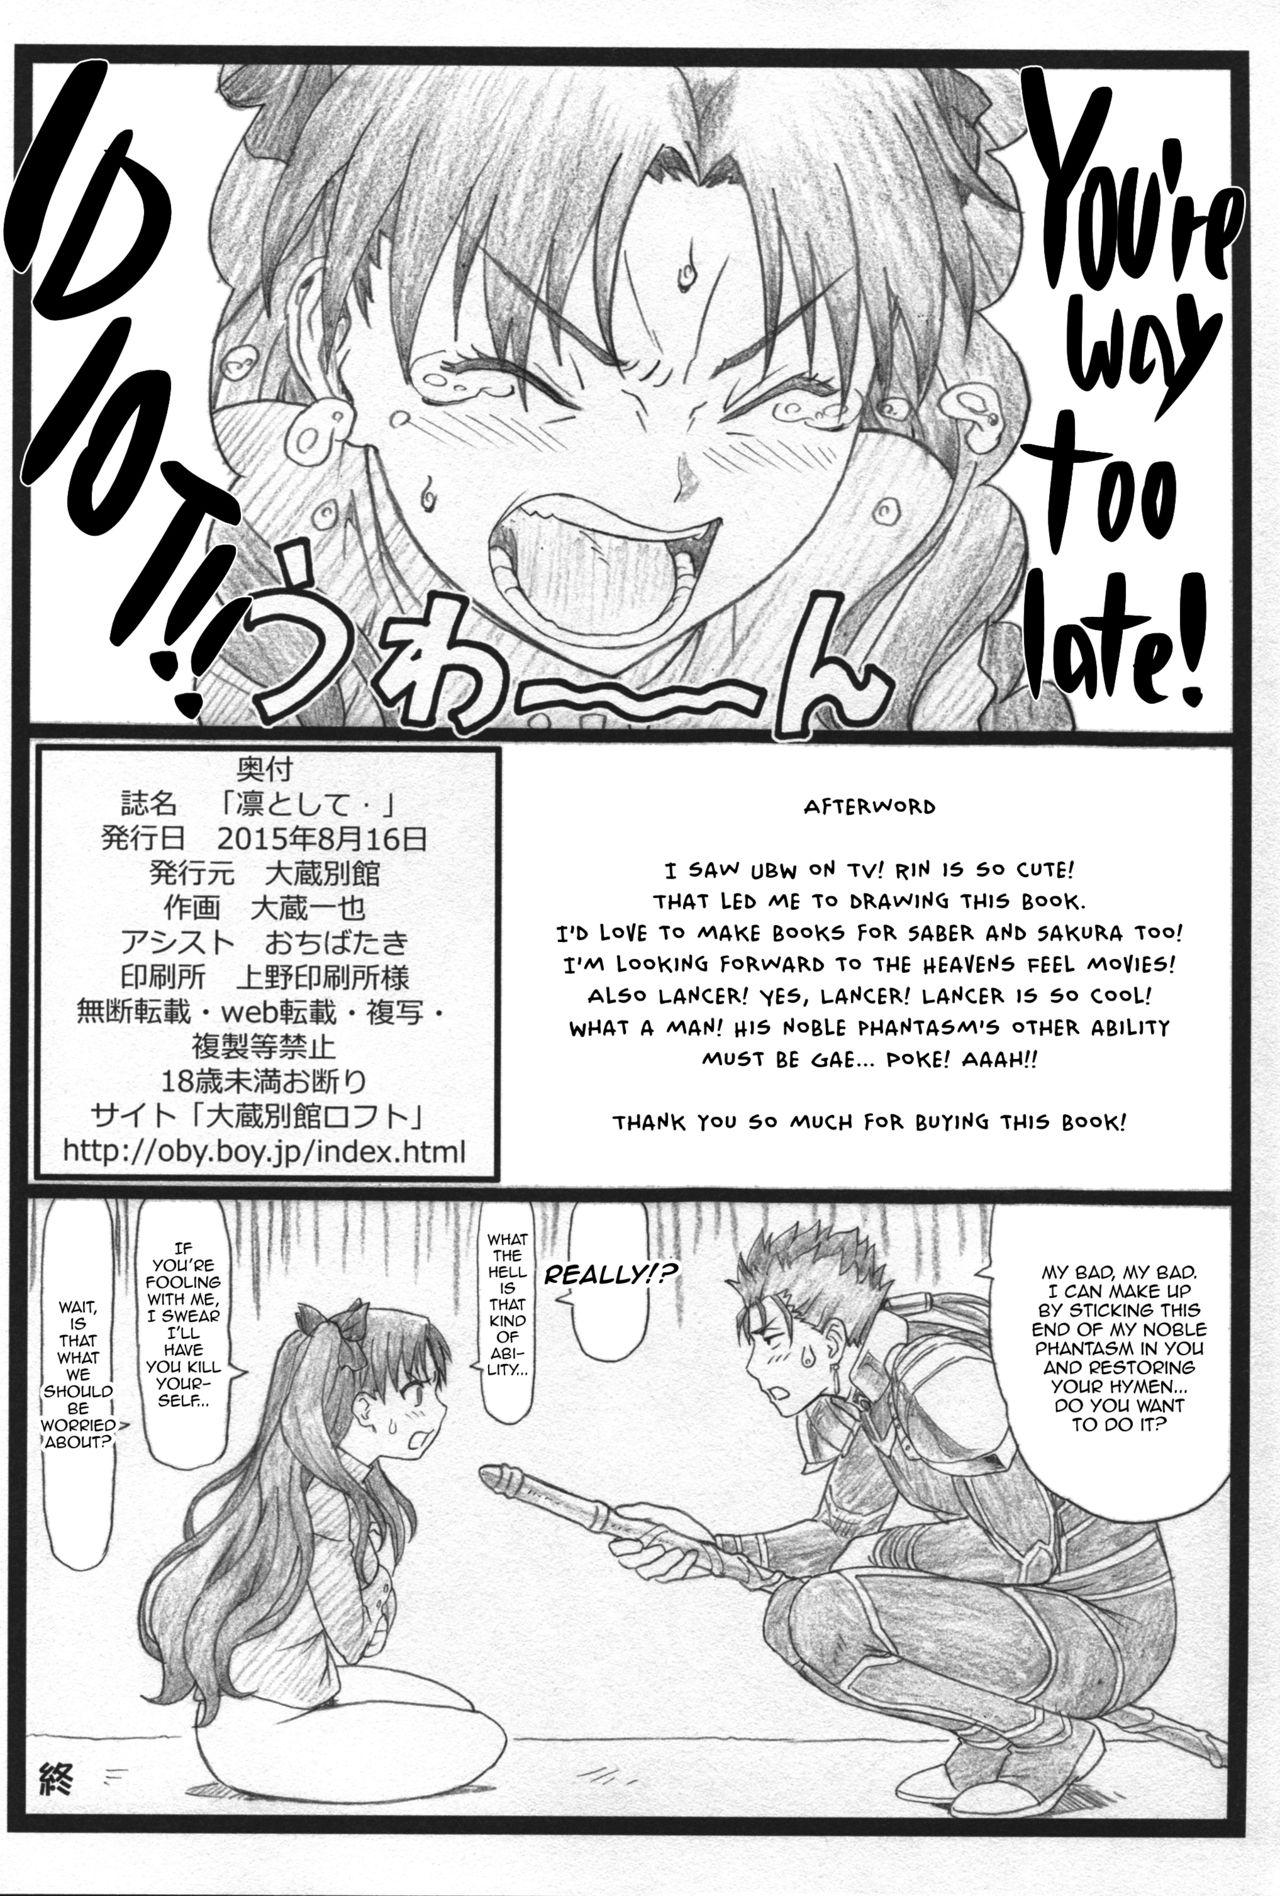 Fodendo Rin to Shite... | With Rin... - Fate stay night Gay Trimmed - Page 26